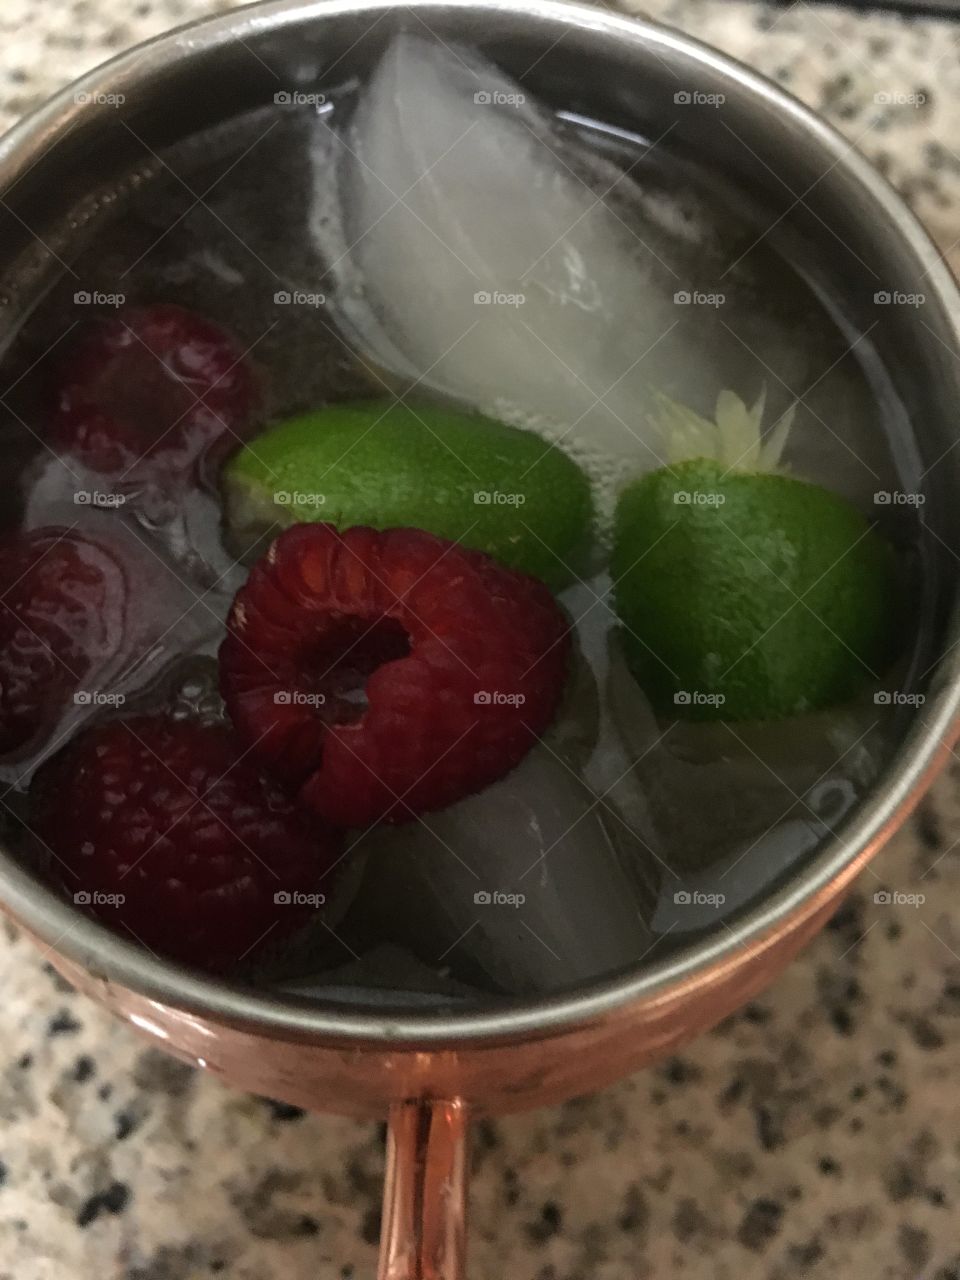 Moscow mule 
